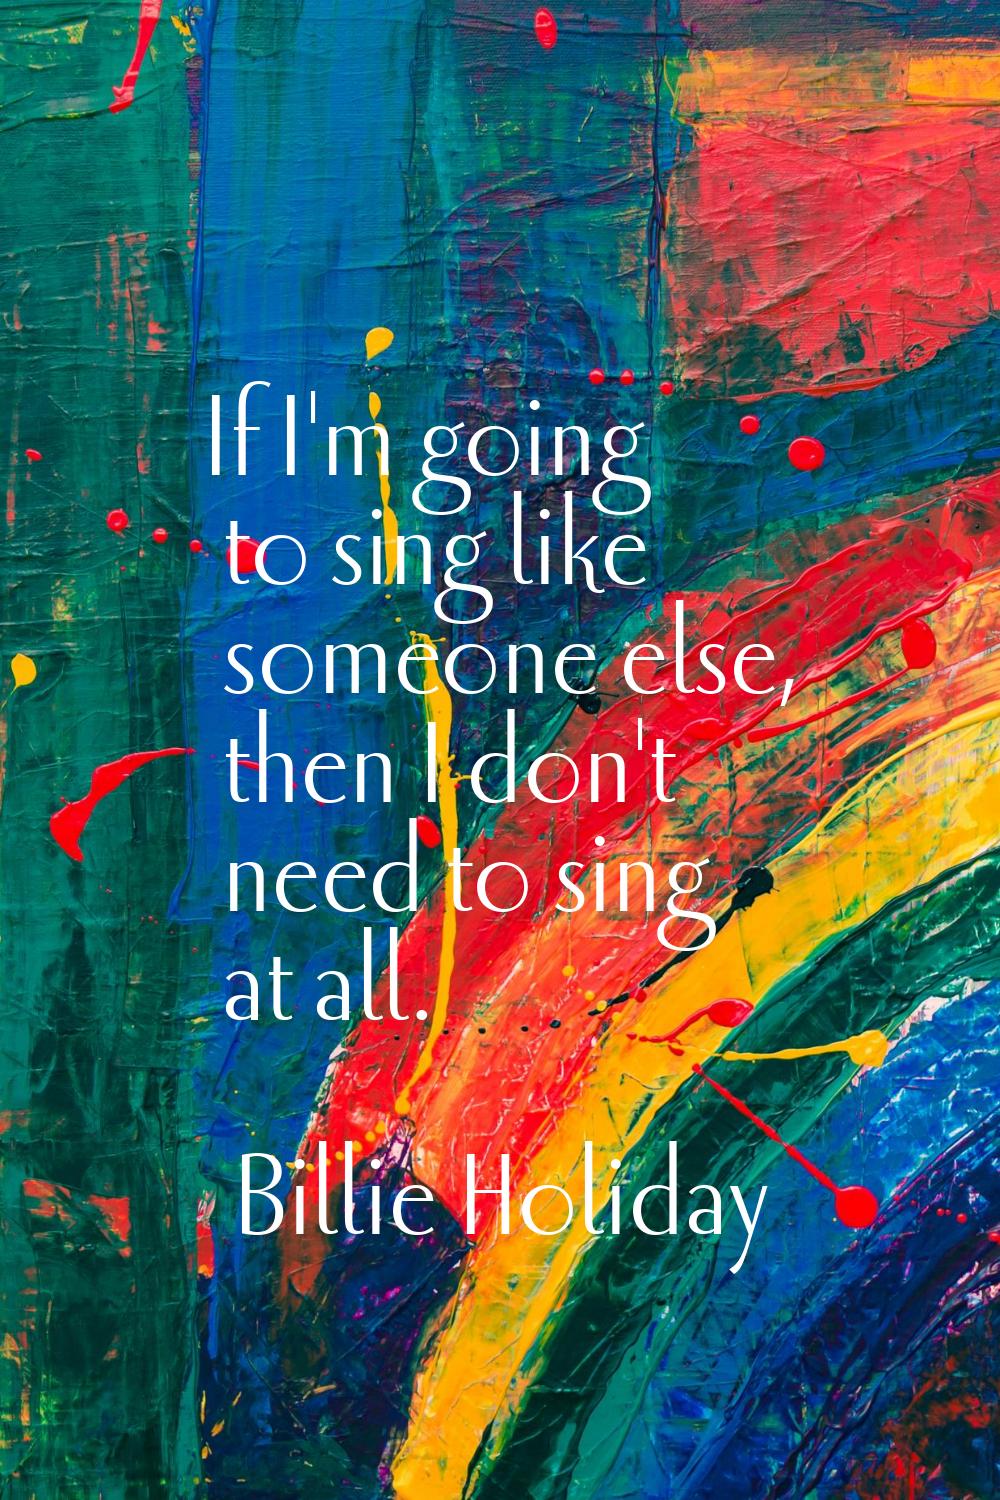 If I'm going to sing like someone else, then I don't need to sing at all.